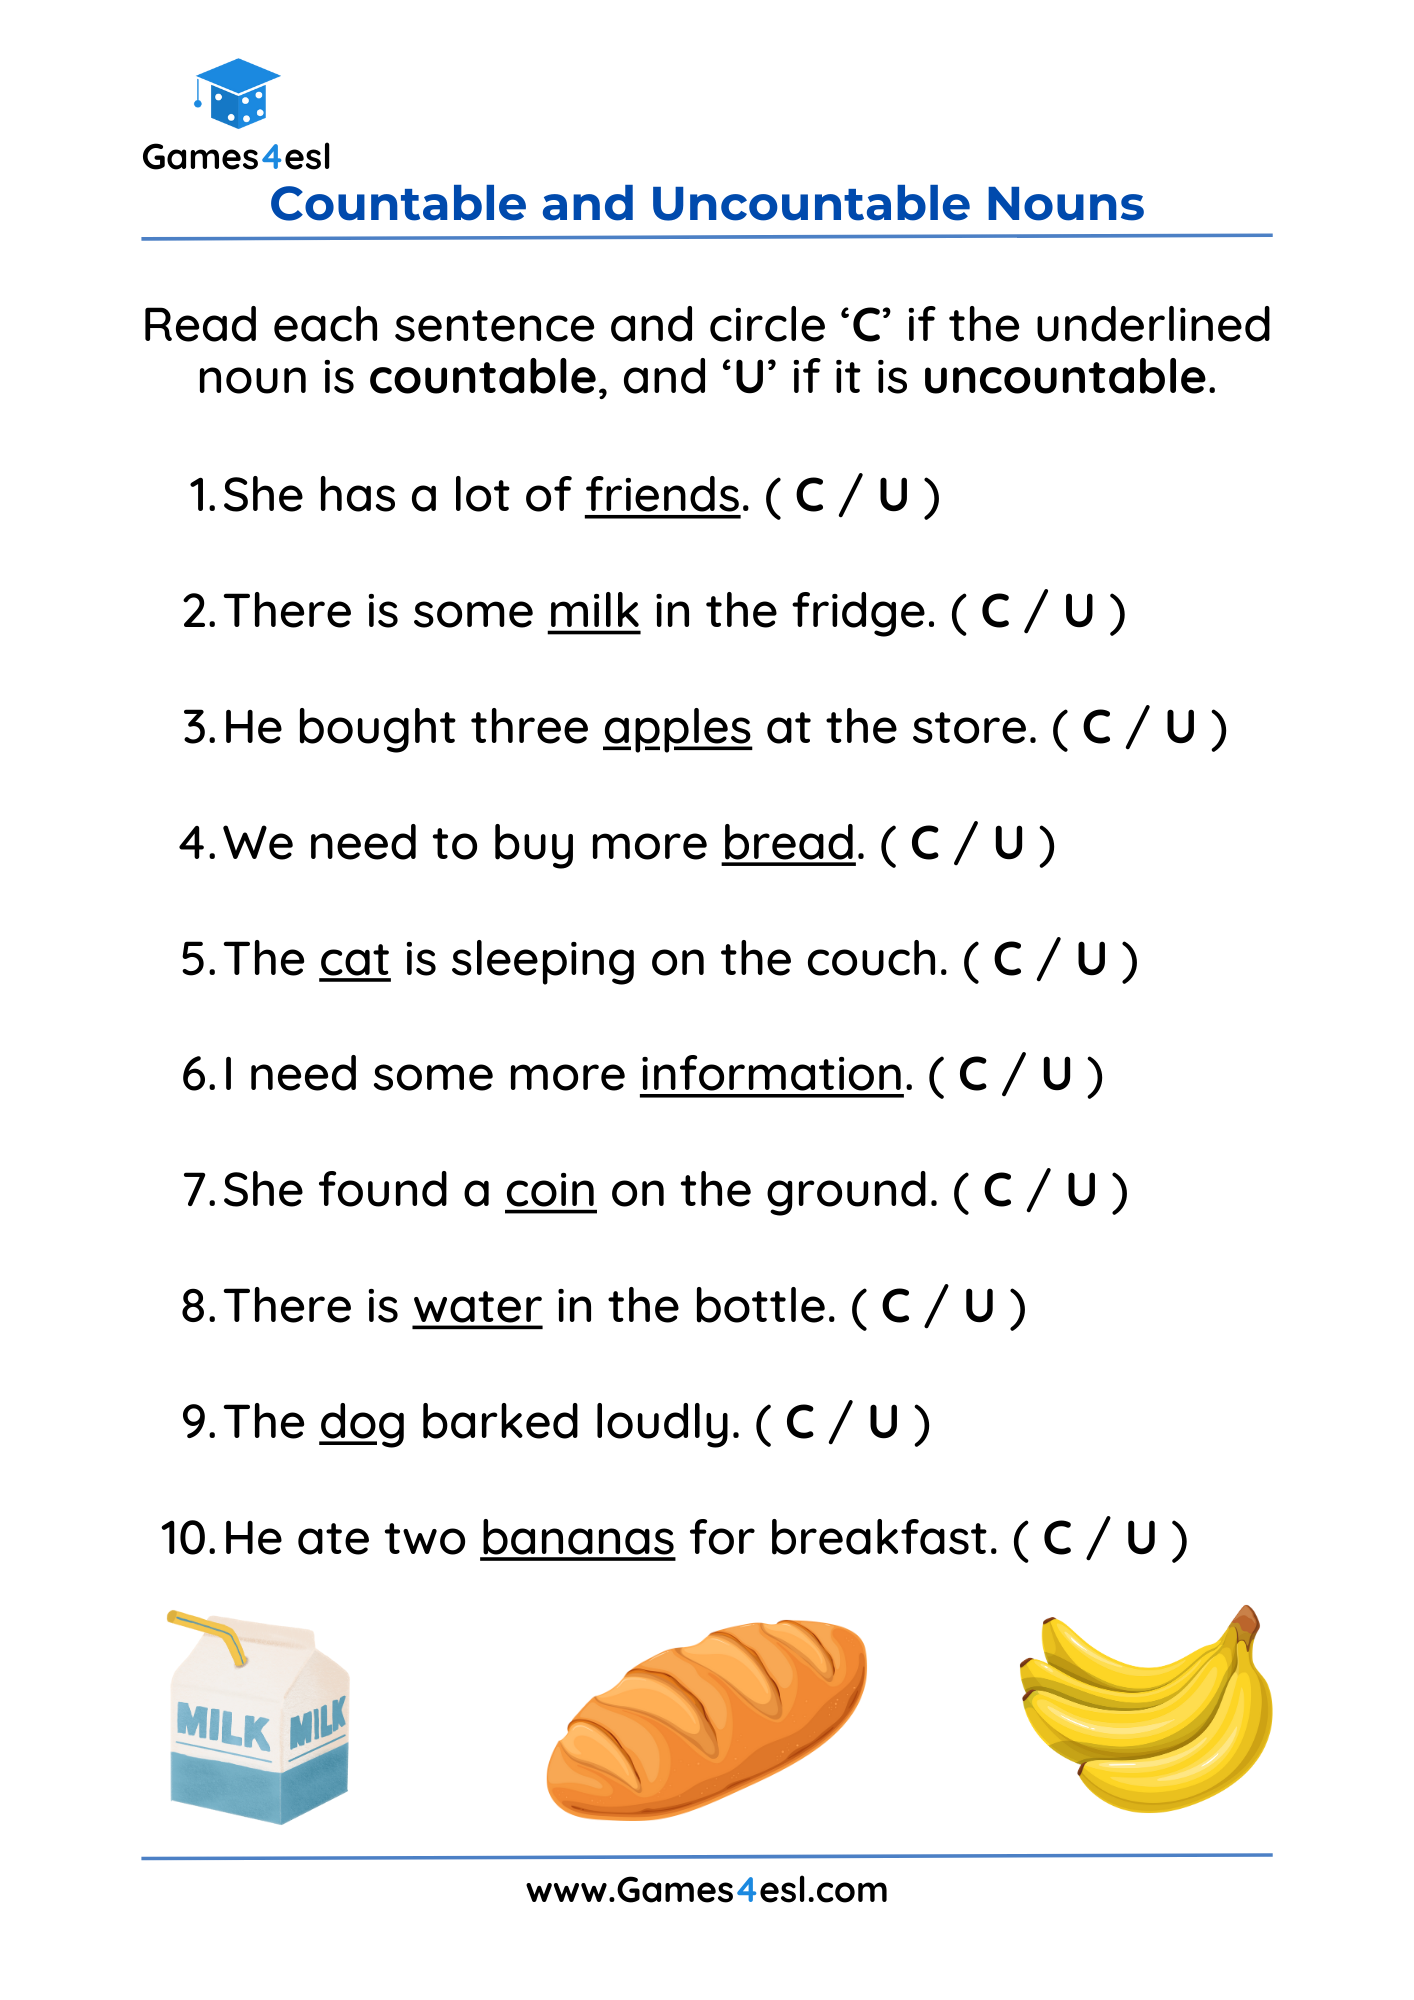 A worksheet about countable and uncountable nouns.